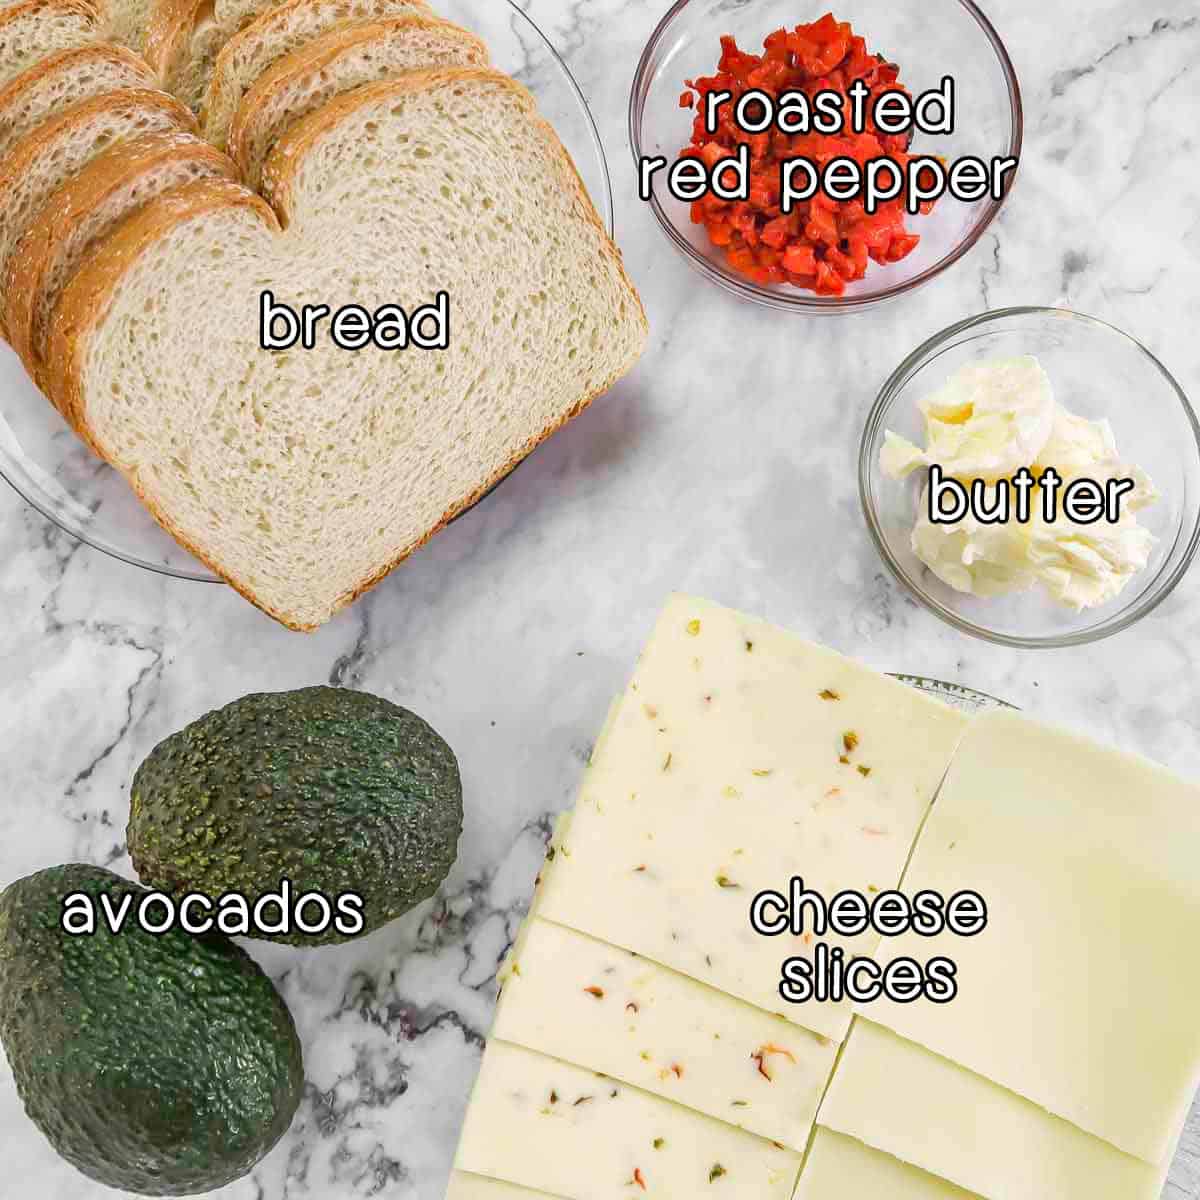 Overhead shot of ingredients- bread, roasted red pepper, butter, cheese slices, and avocados.